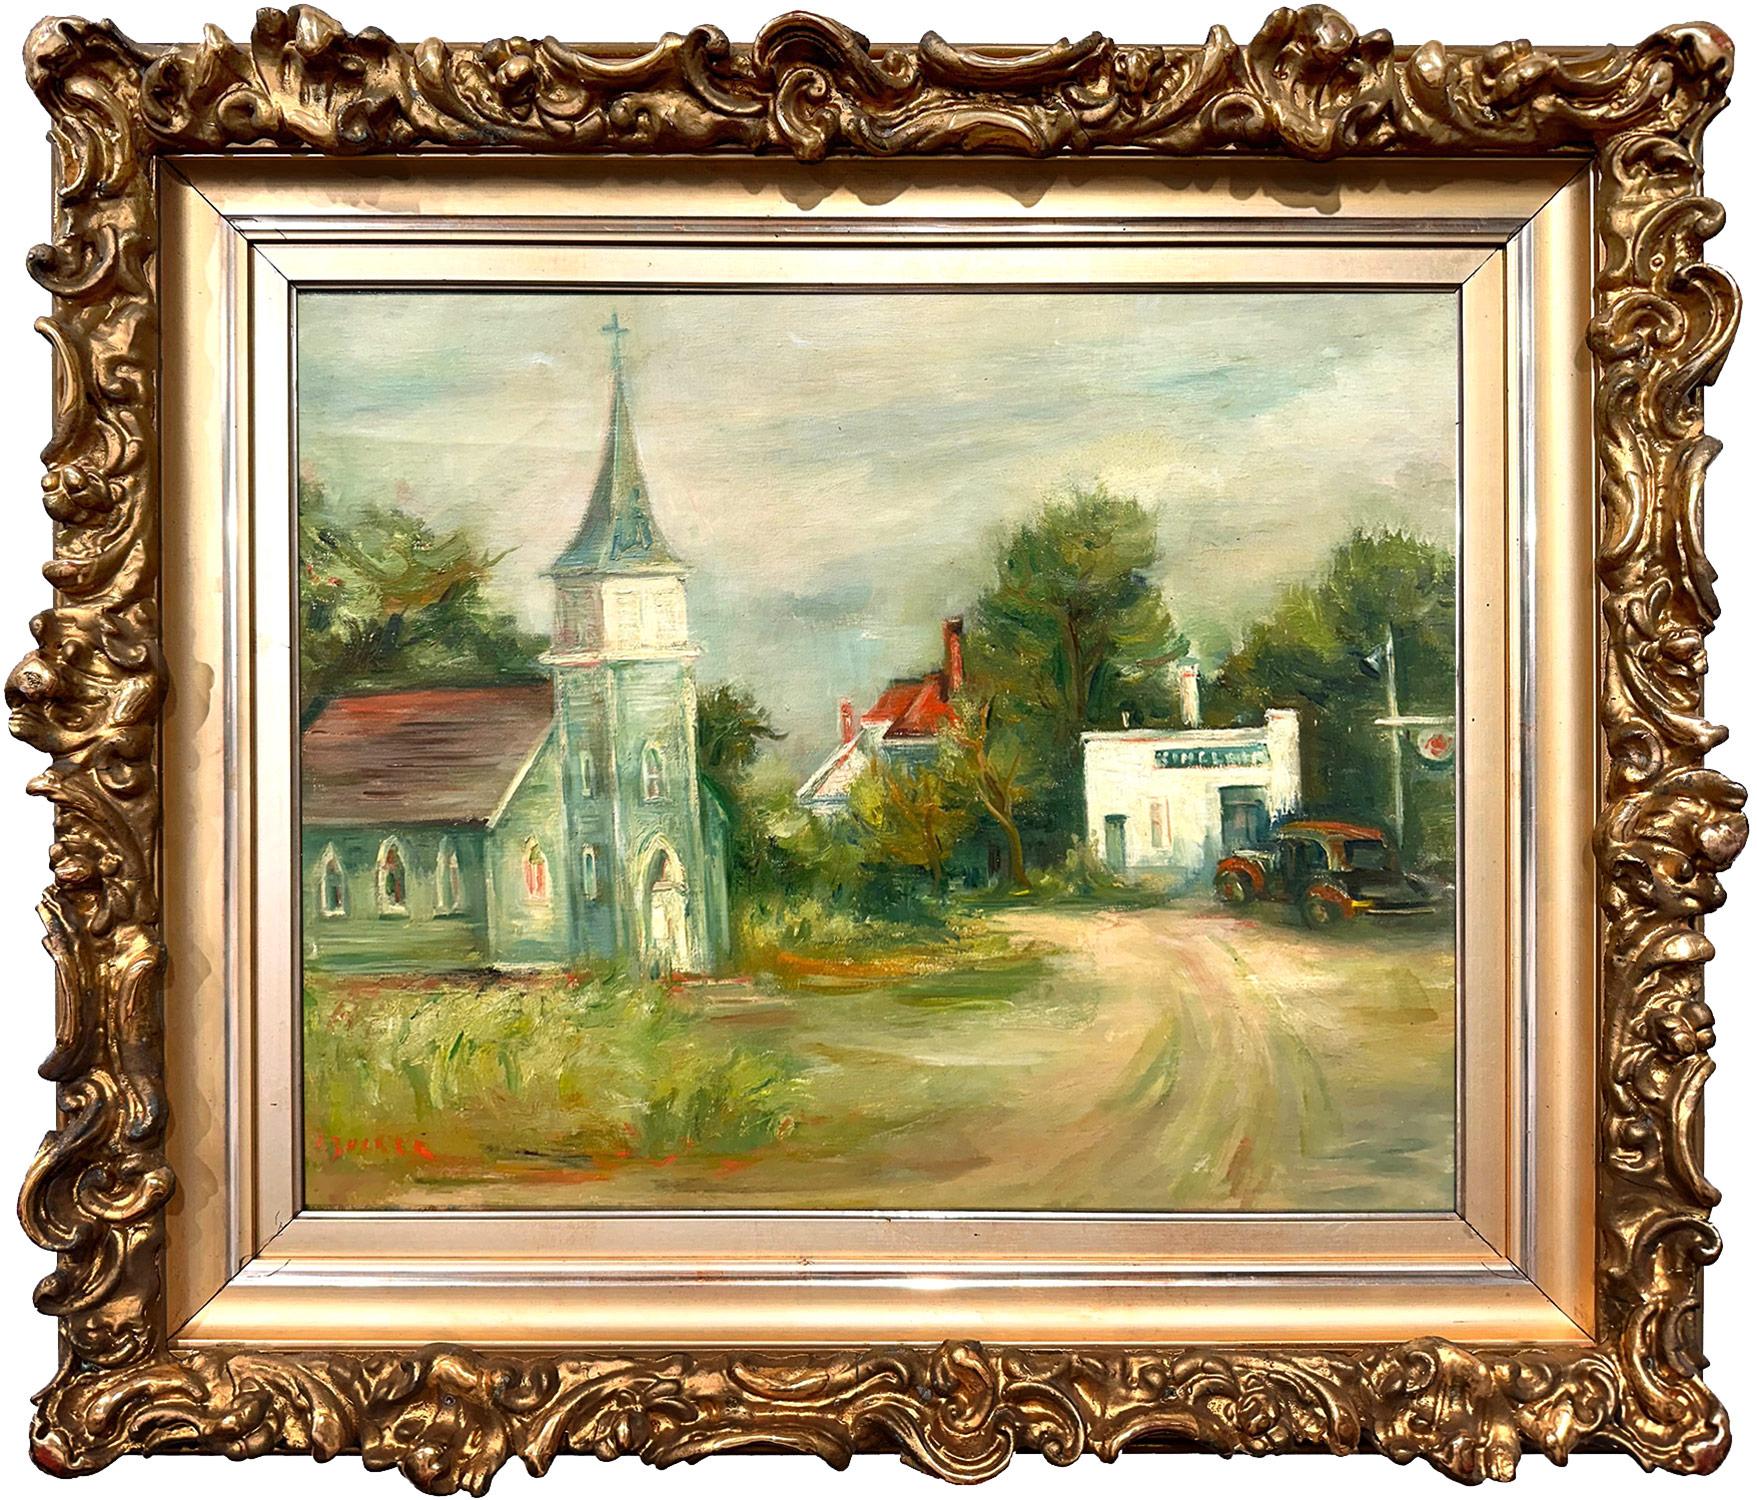 Jacques Zucker Landscape Painting - "Town's Church" Post-Impressionist Landscape Oil Painting on Canvas Framed